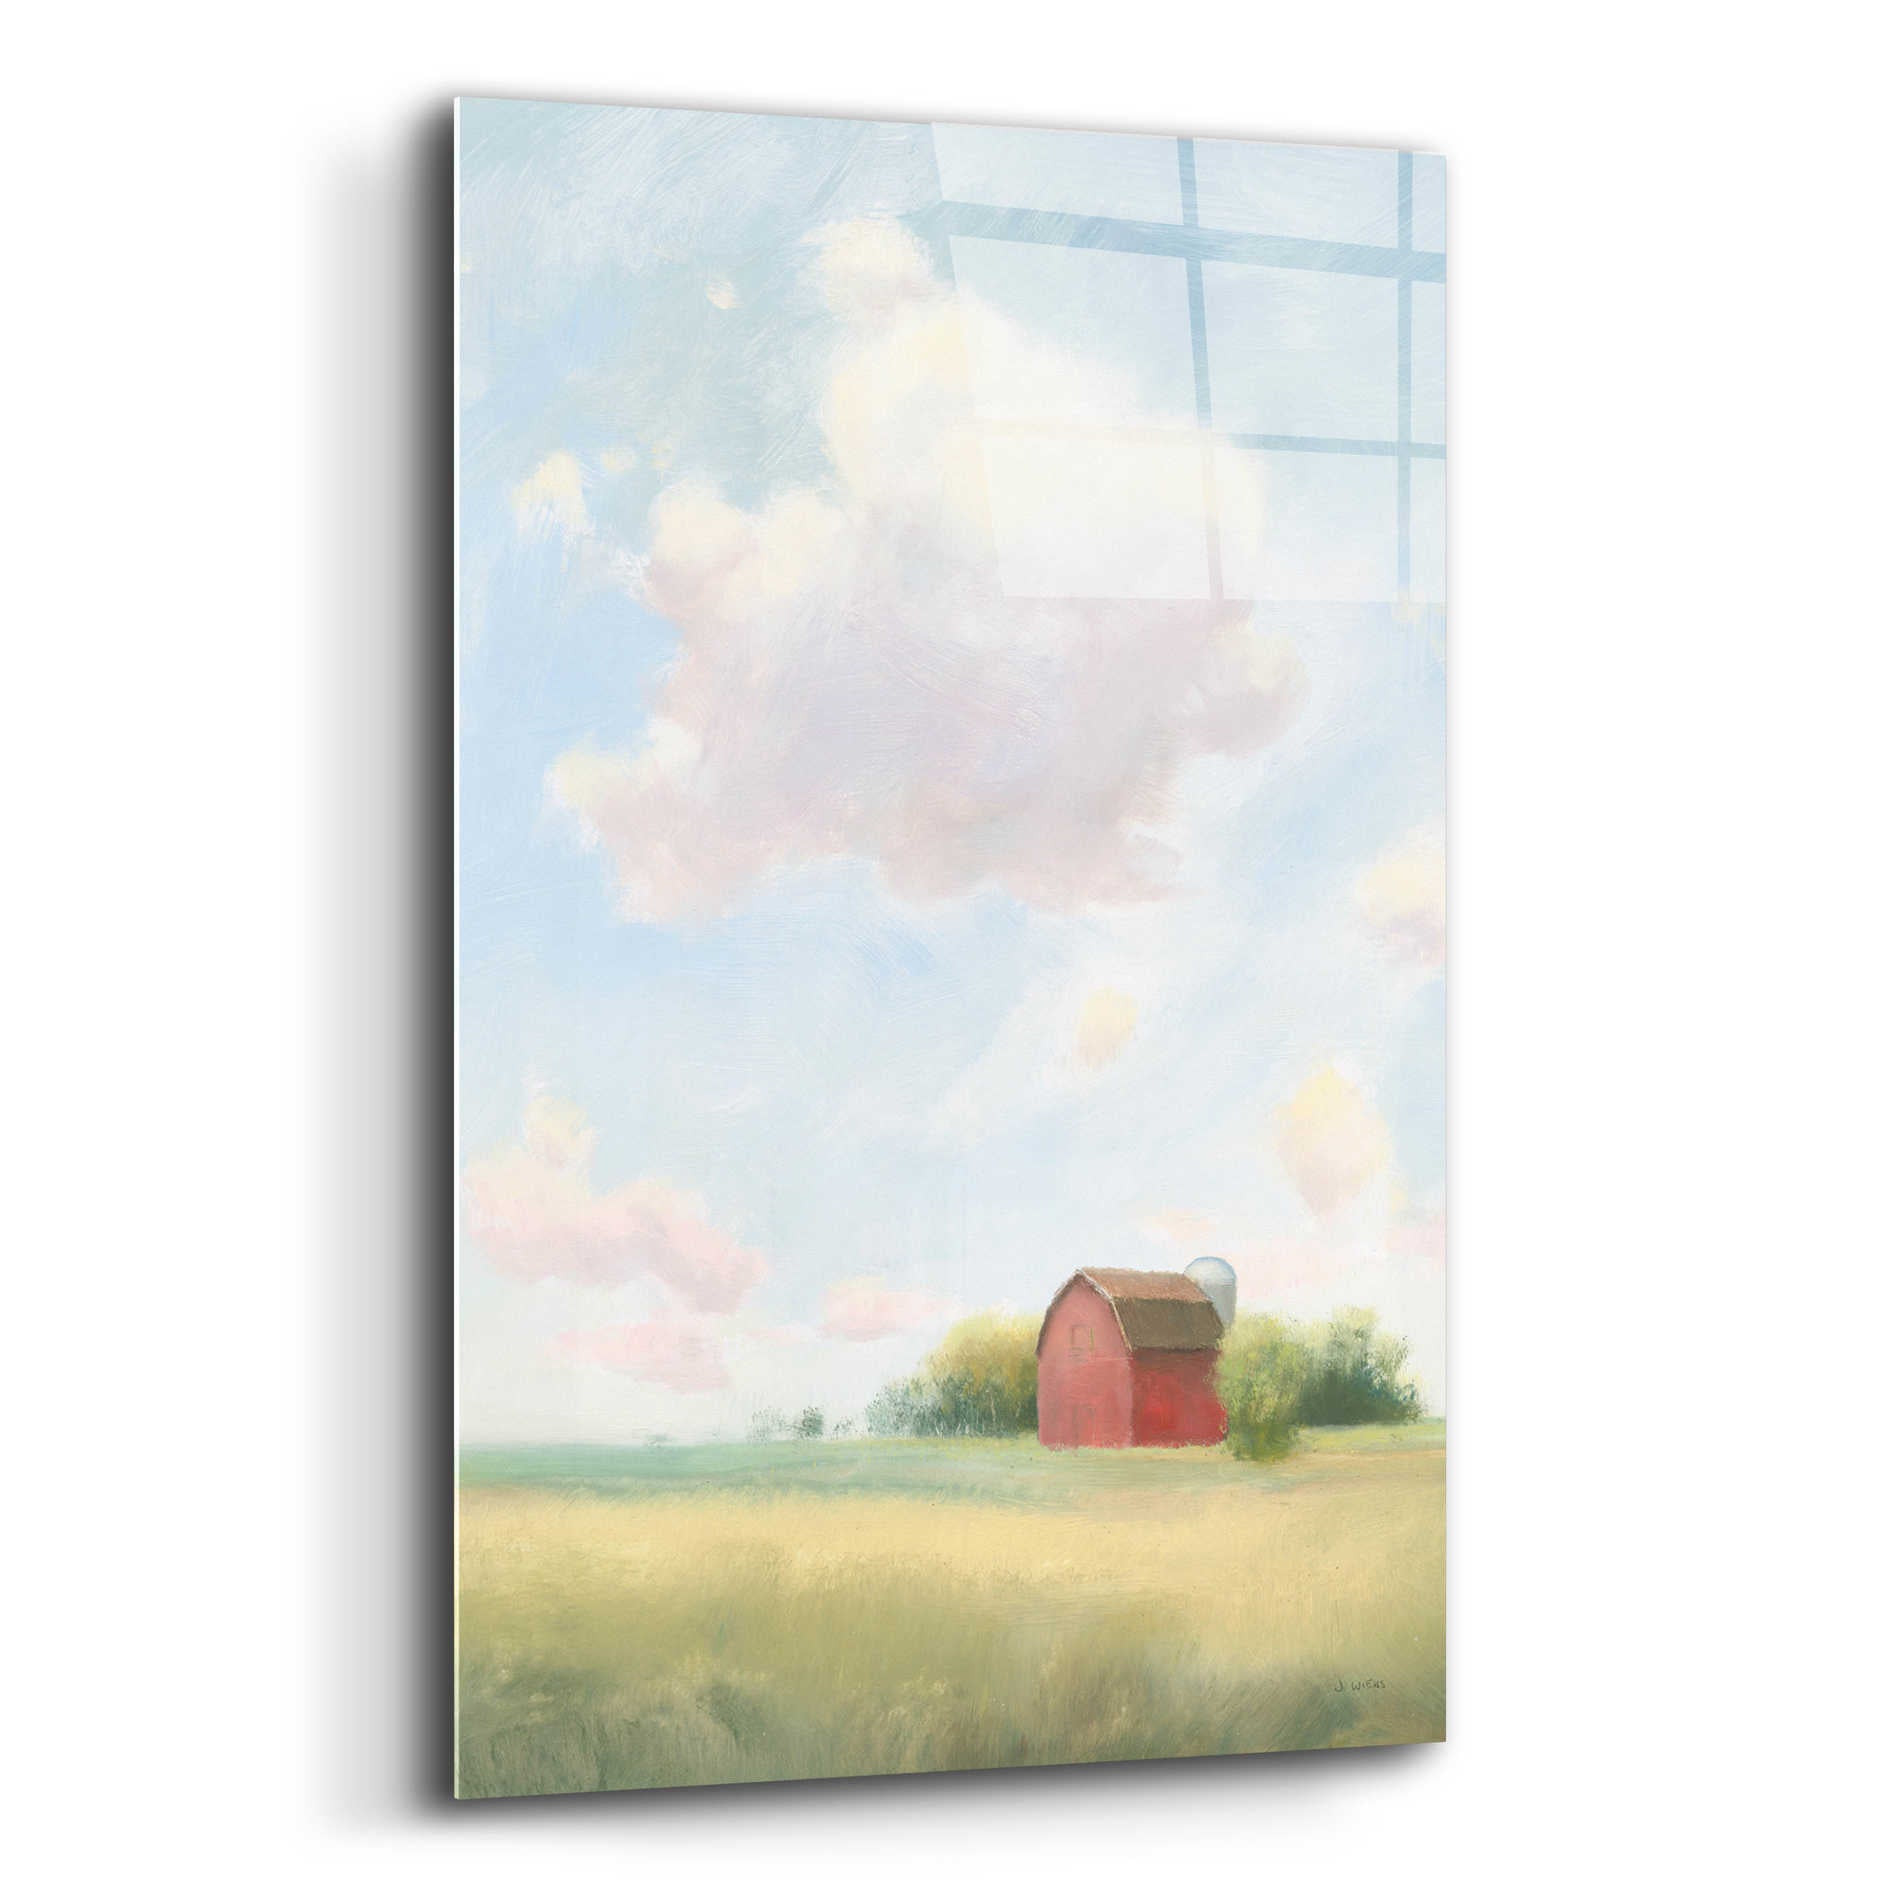 Epic Art 'Pleasant Pastures' by James Wiens, Acrylic Glass Wall Art,12x16